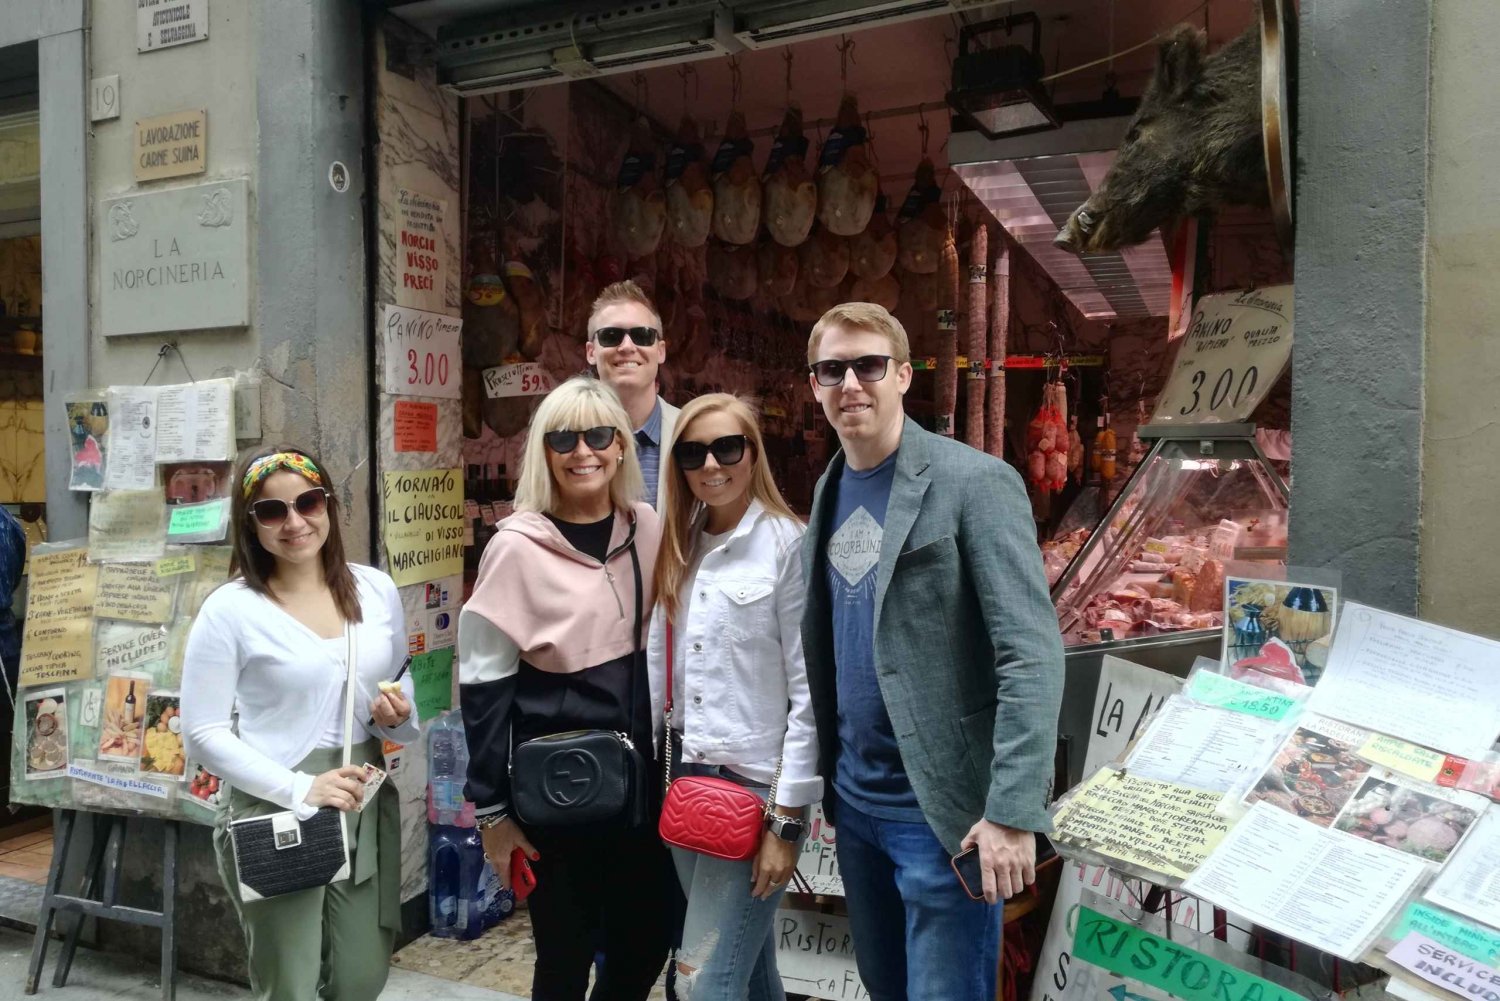 Florence: Street Food Tour with Local Expert Guide